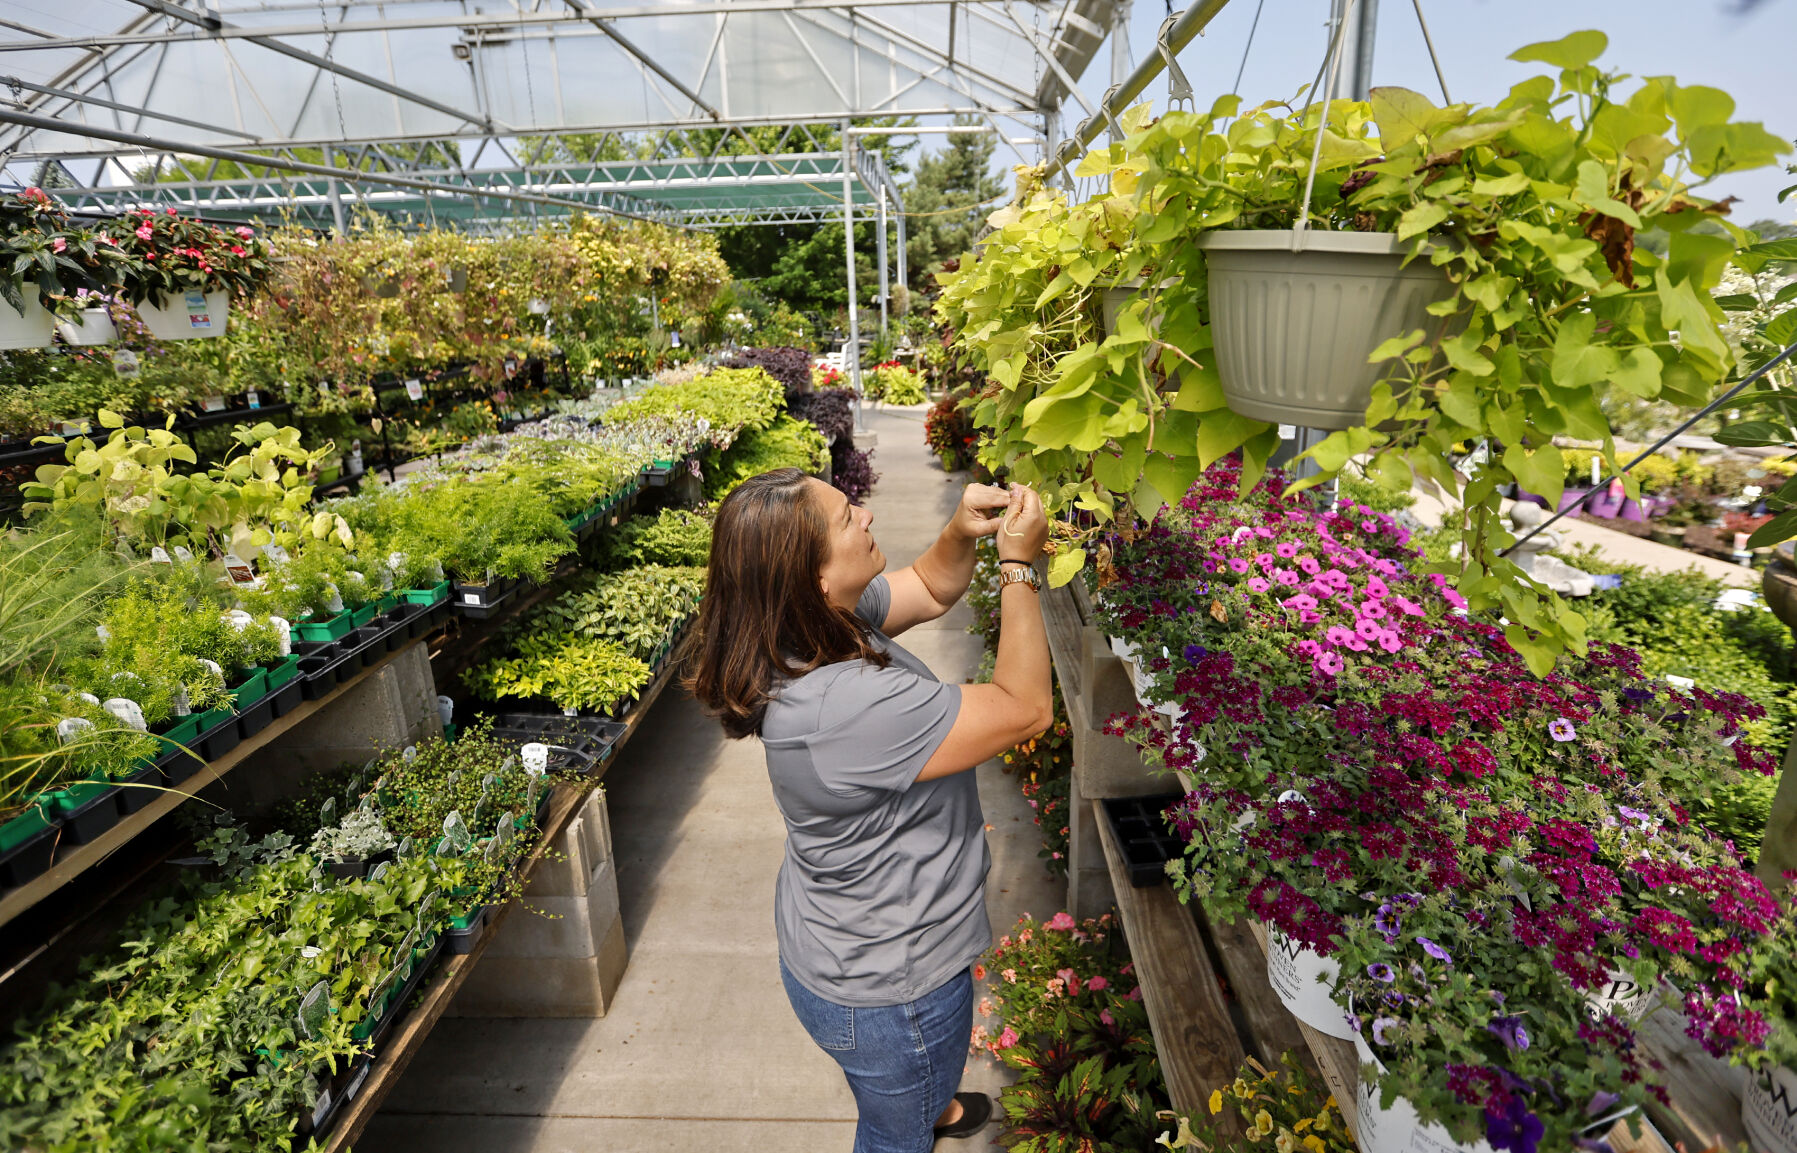 Stacy Raap, marketing and communications manager at Steve’s Ace Home & Garden, arranges displays at the facility in Dubuque.    PHOTO CREDIT: Jessica Reilly